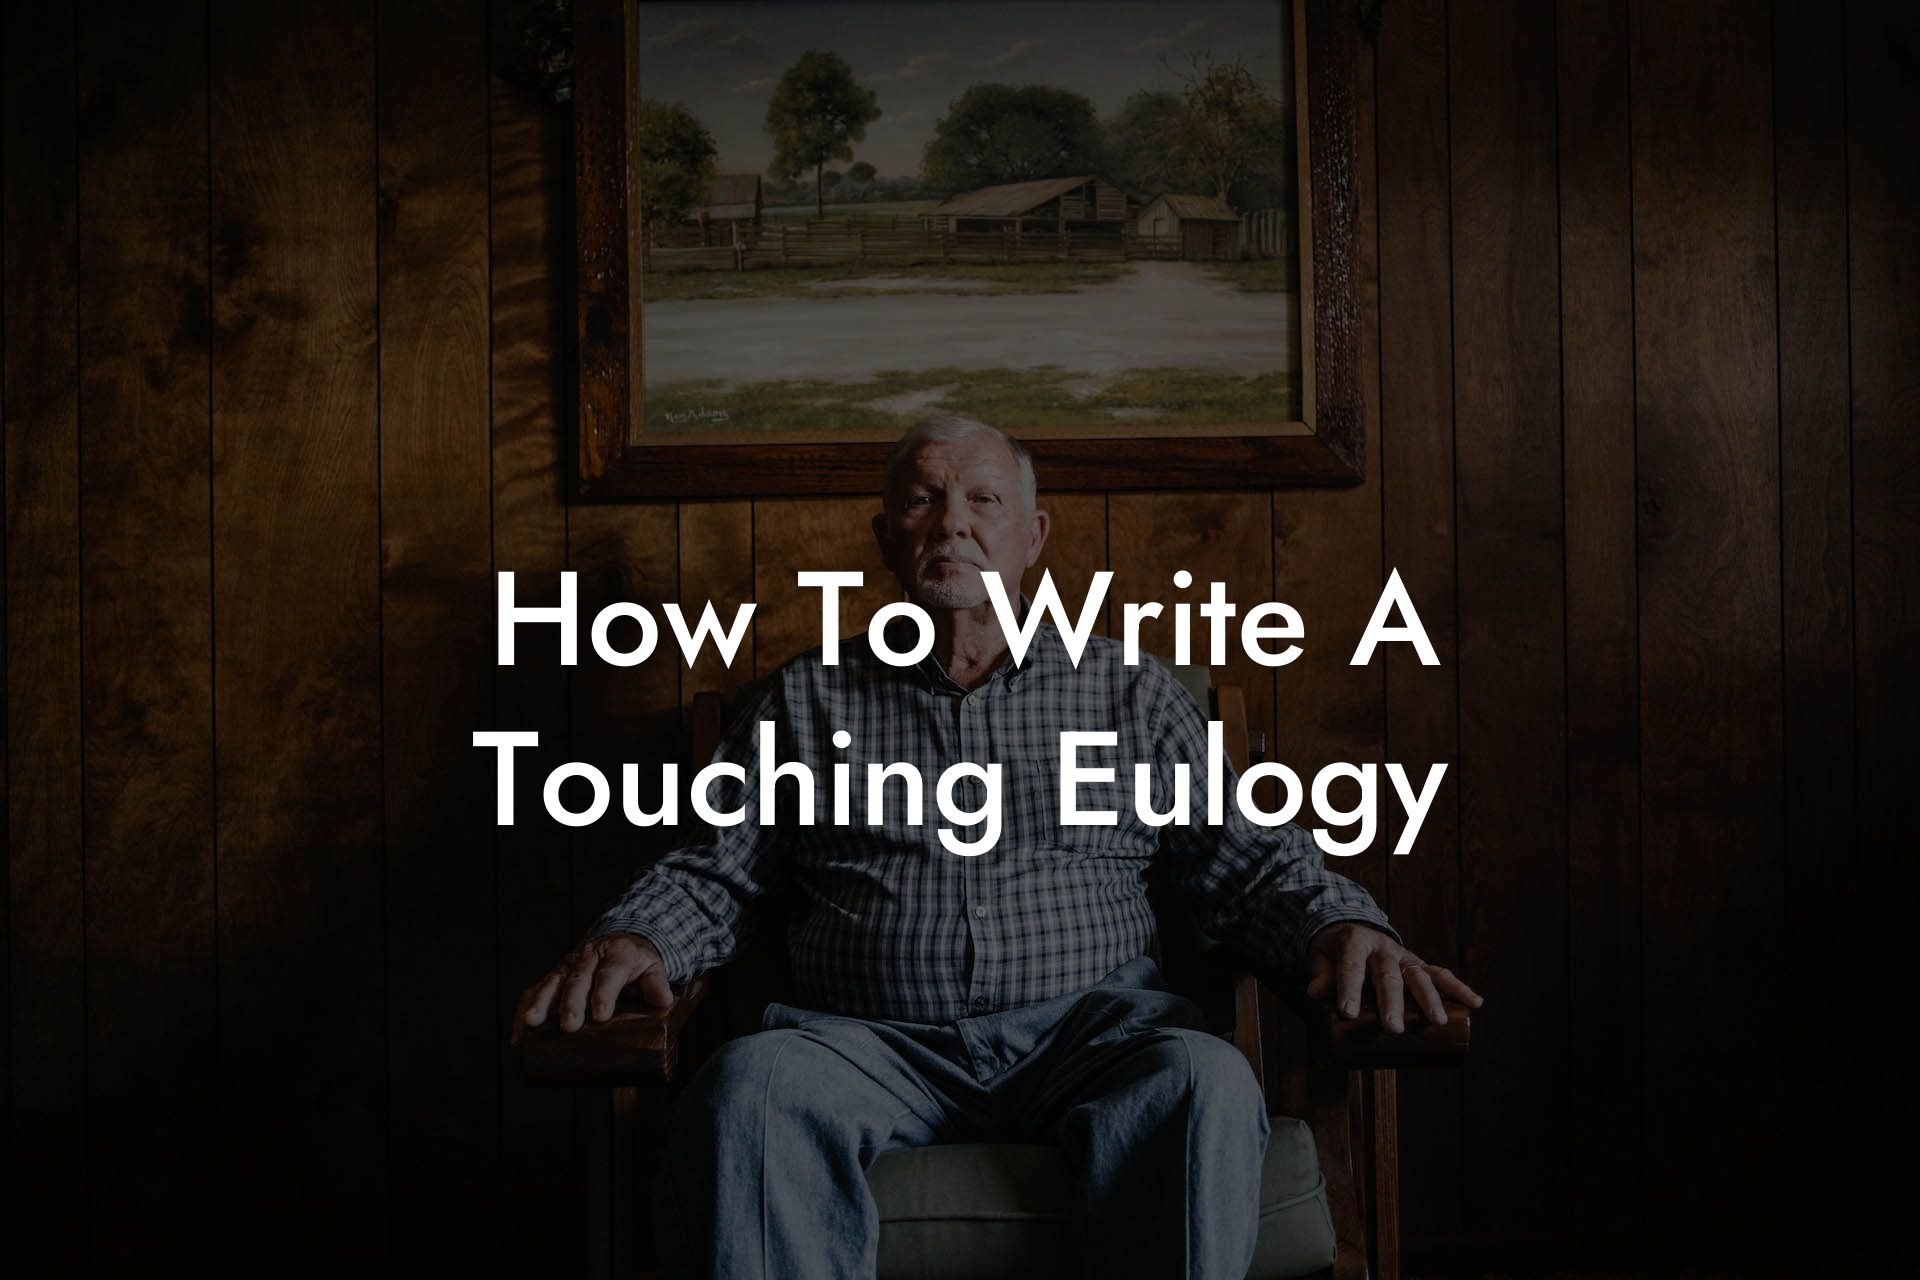 How To Write A Touching Eulogy